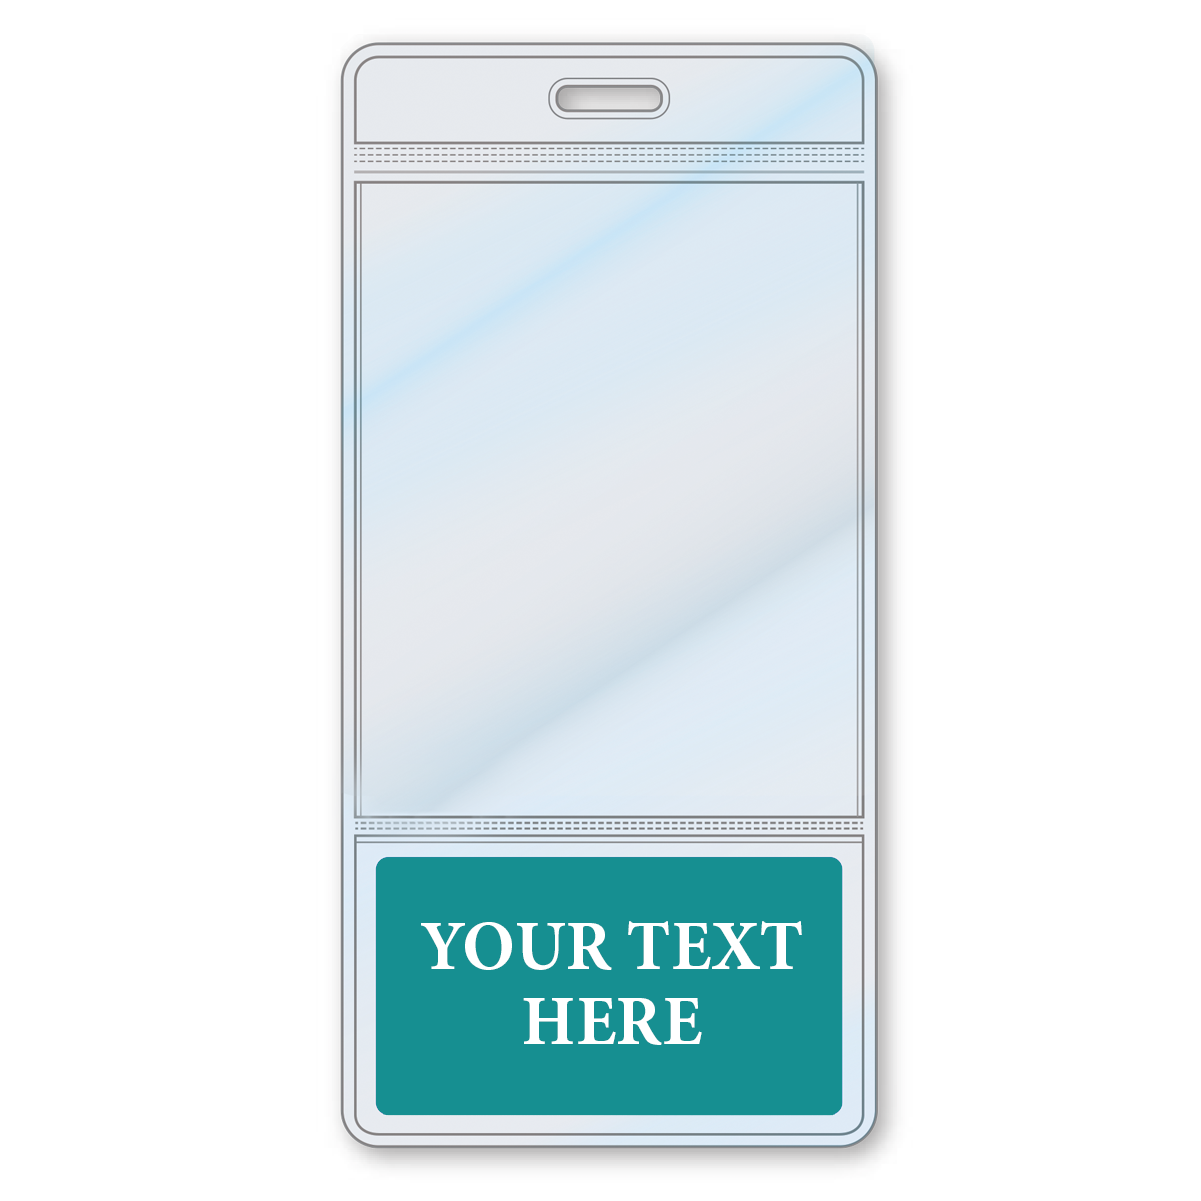 A Custom Printed BadgeBottoms® Vertical (Badge Holder & Badge Buddy IN ONE!!) with a teal section at the bottom displaying "Your Text Here." The badge has a slot at the top for easy attachment, making it the perfect role identifying badge holder.